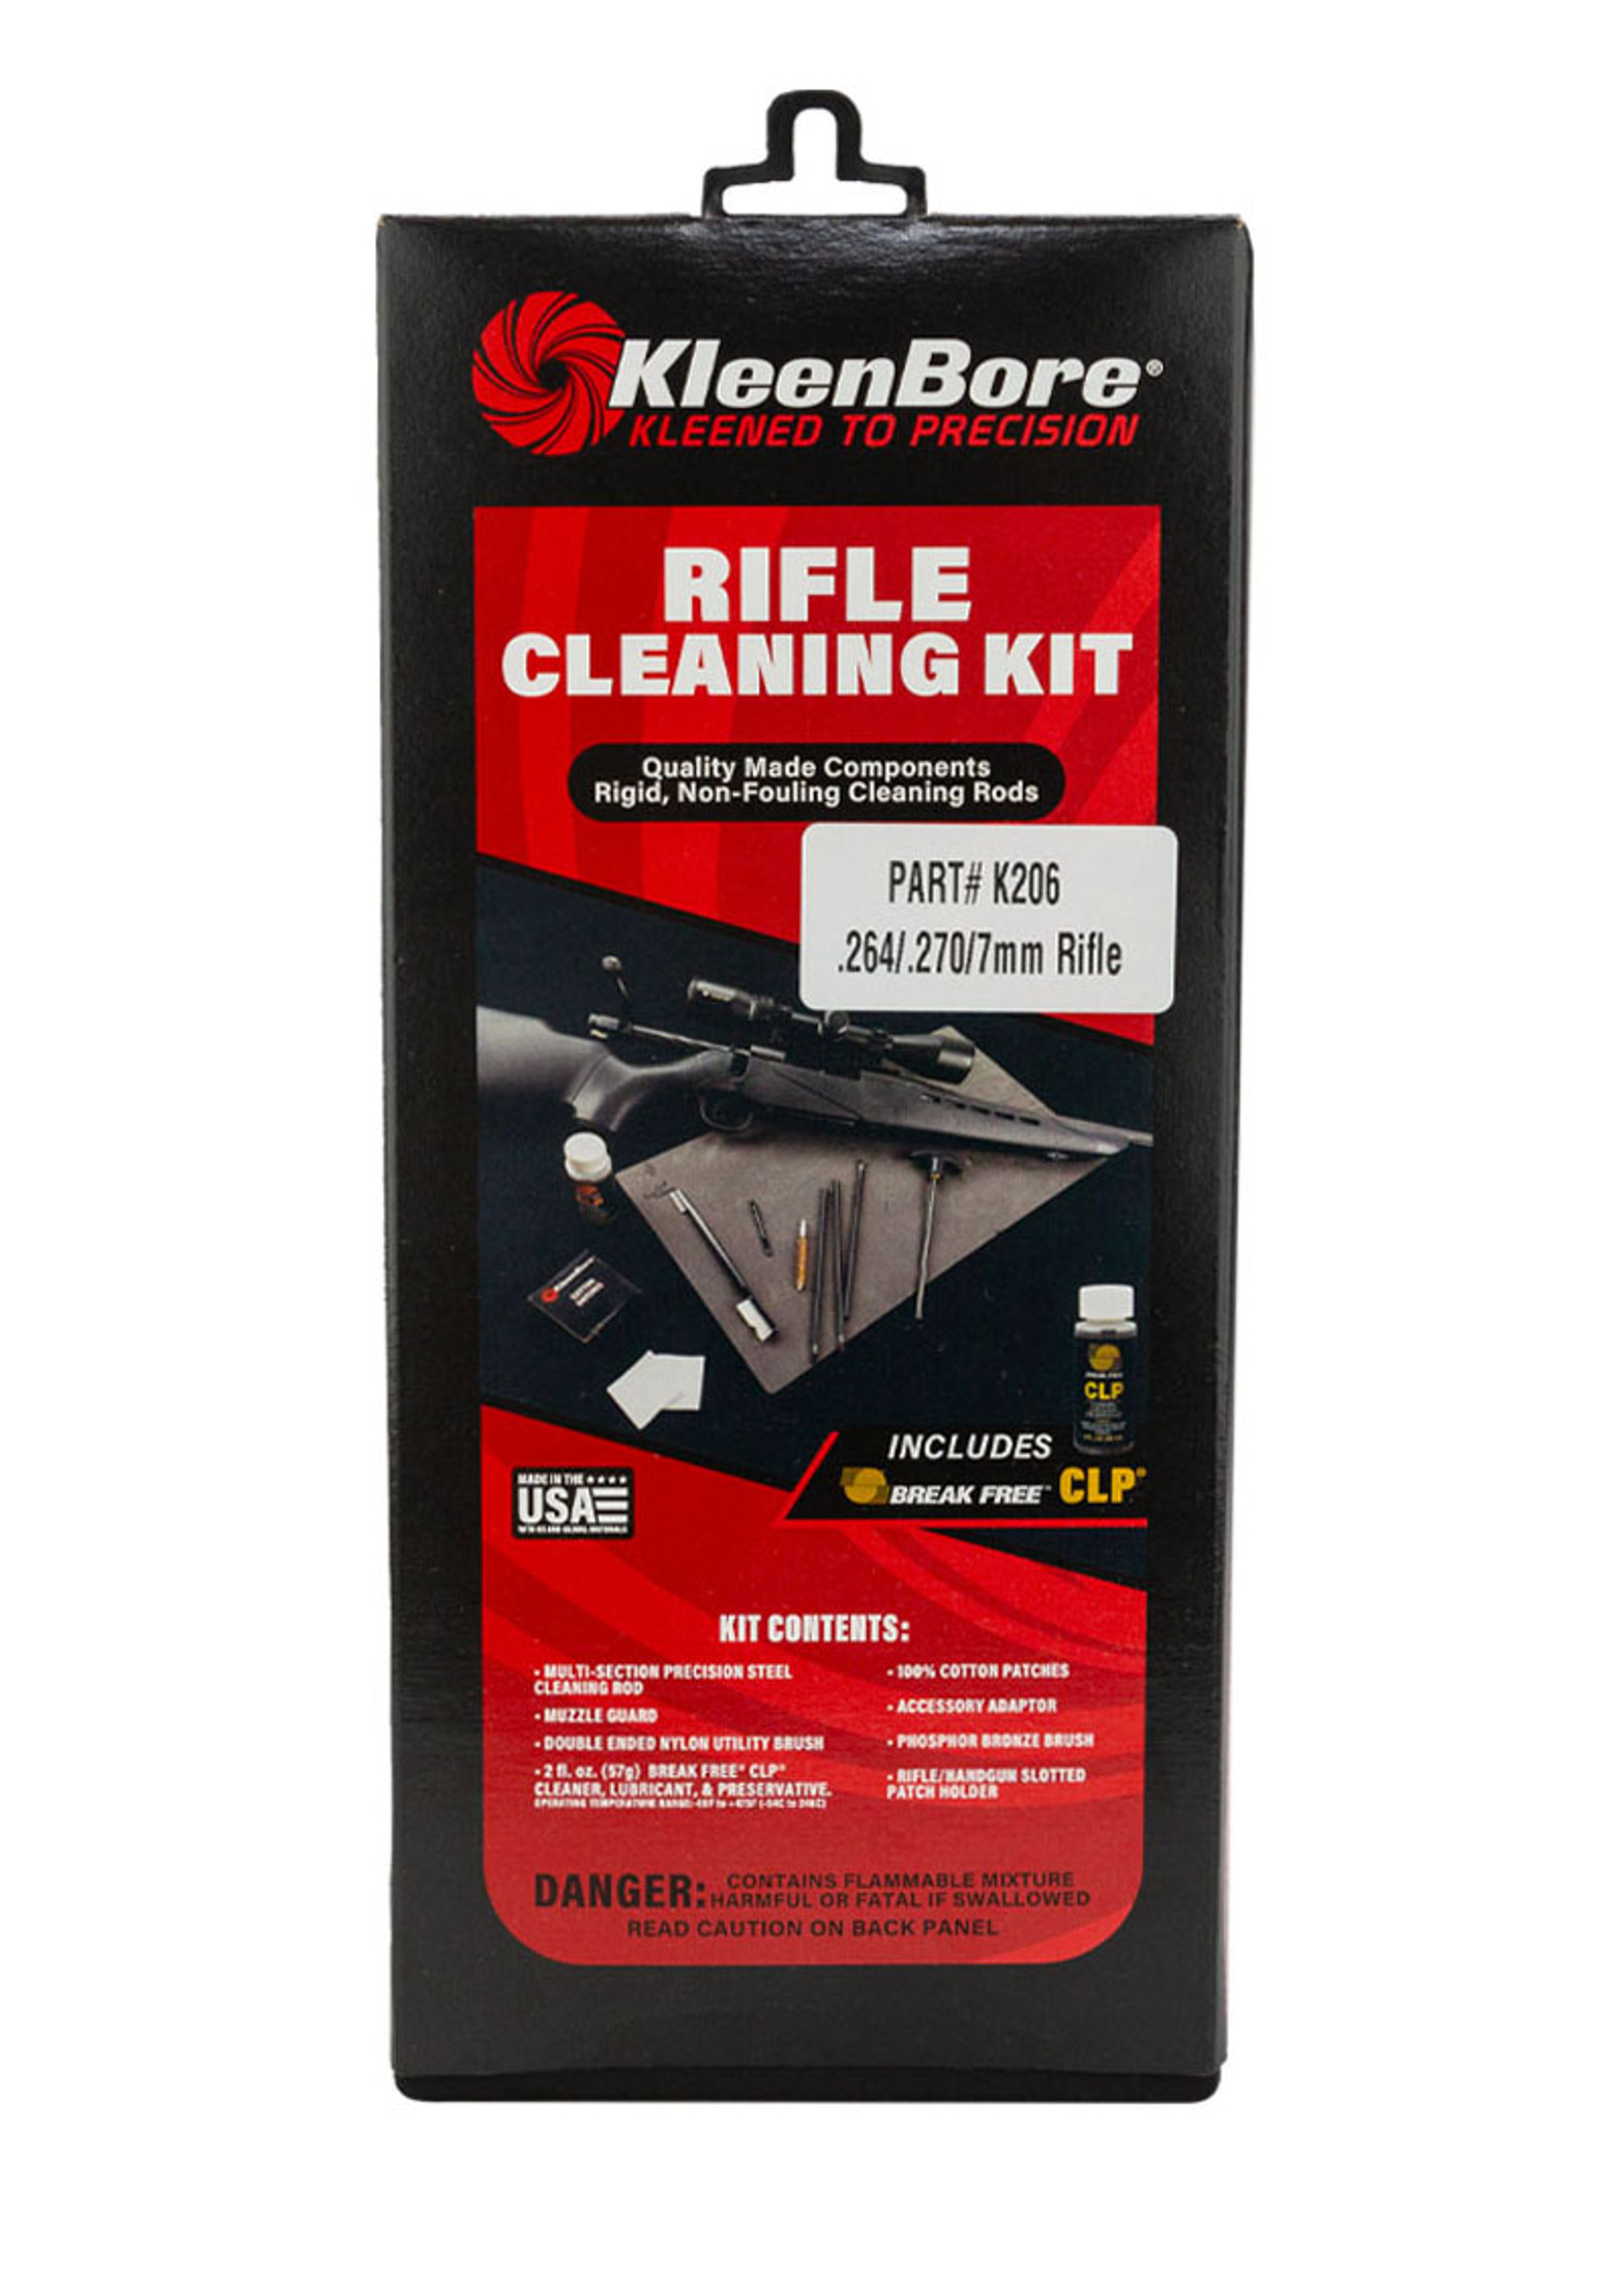 .264/.270/7mm Rifle Cleaning Kit